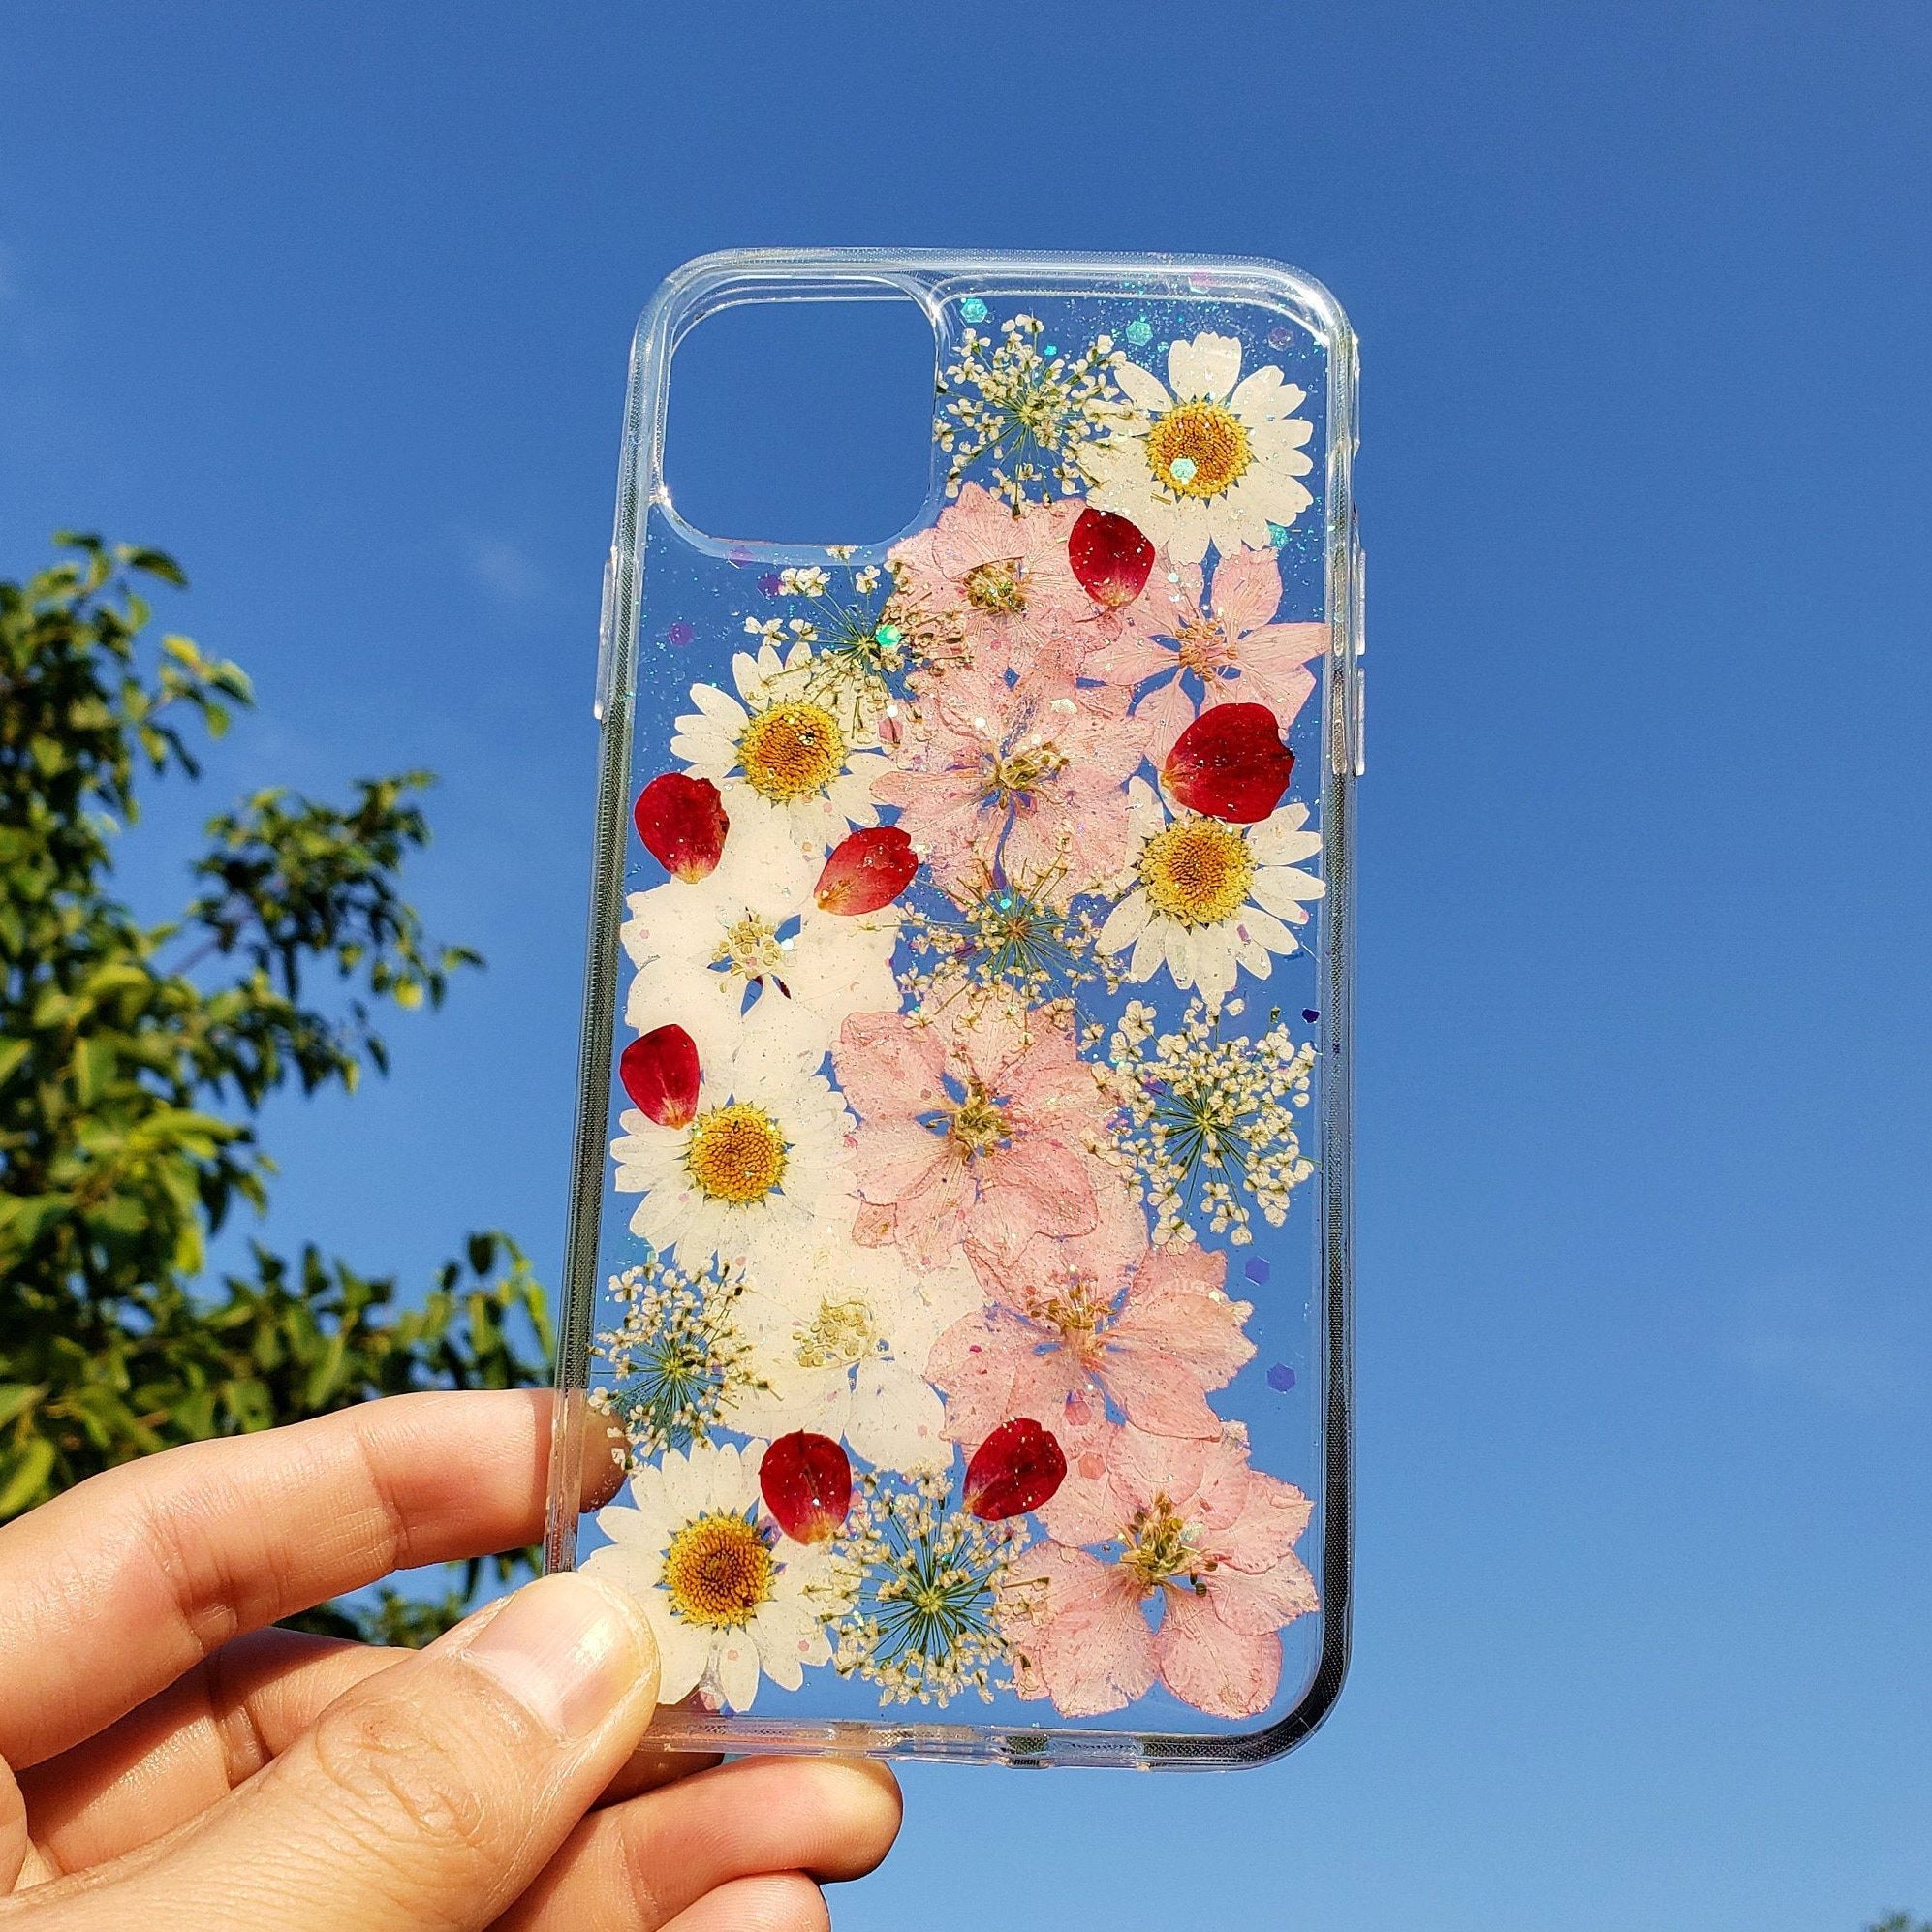 how to decorate a phone case